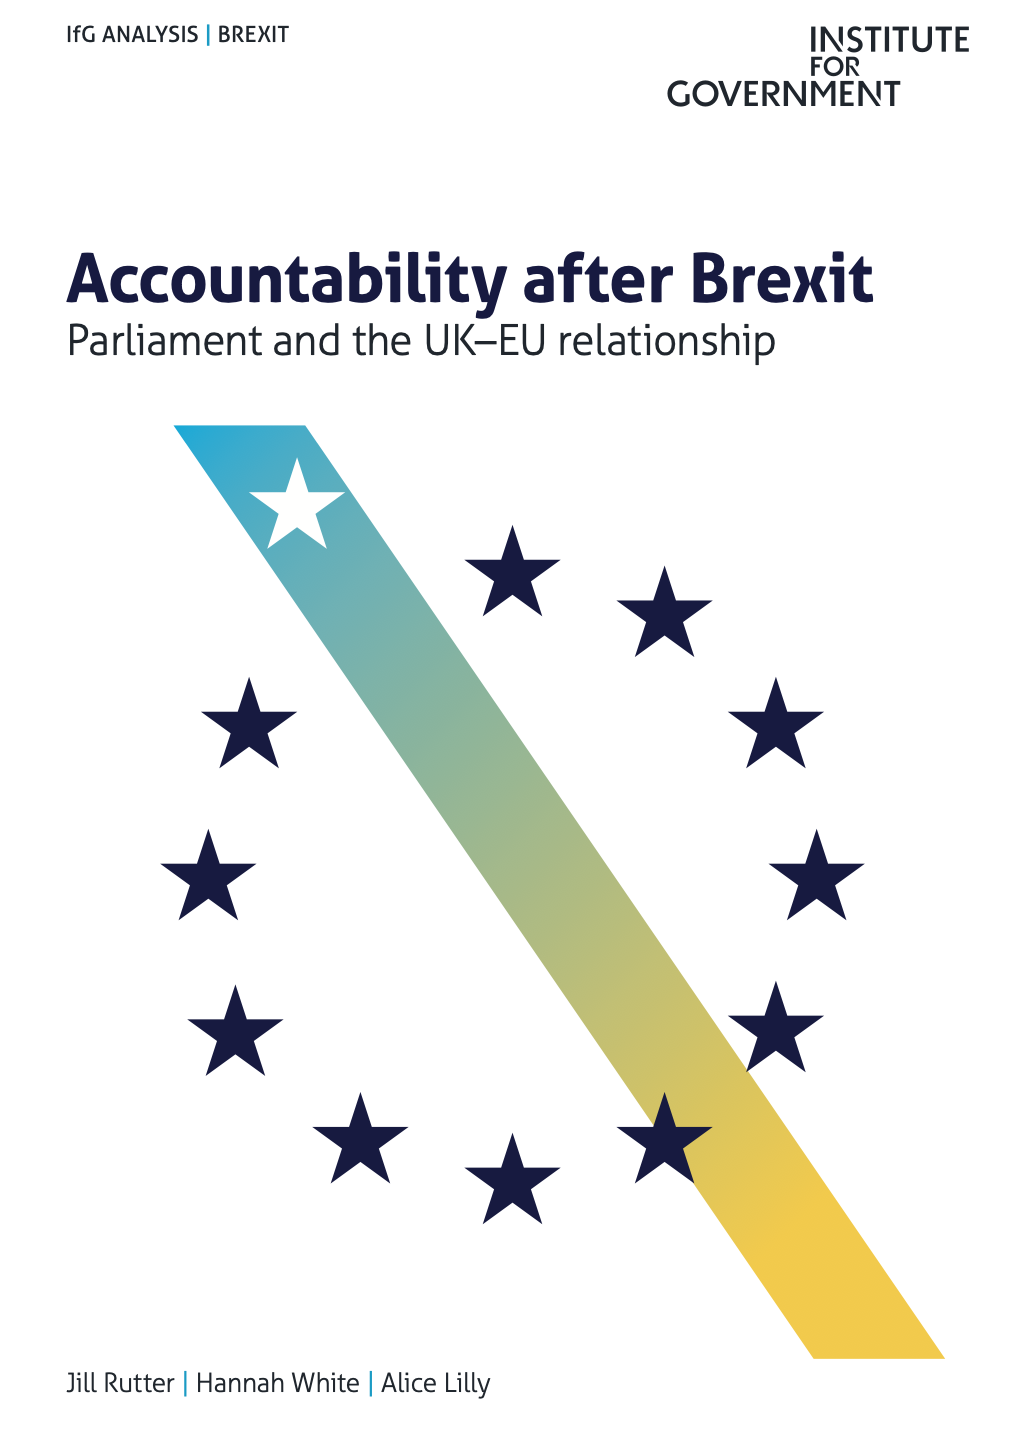 Accountability after Brexit (Parliament and the UK–EU relationship)